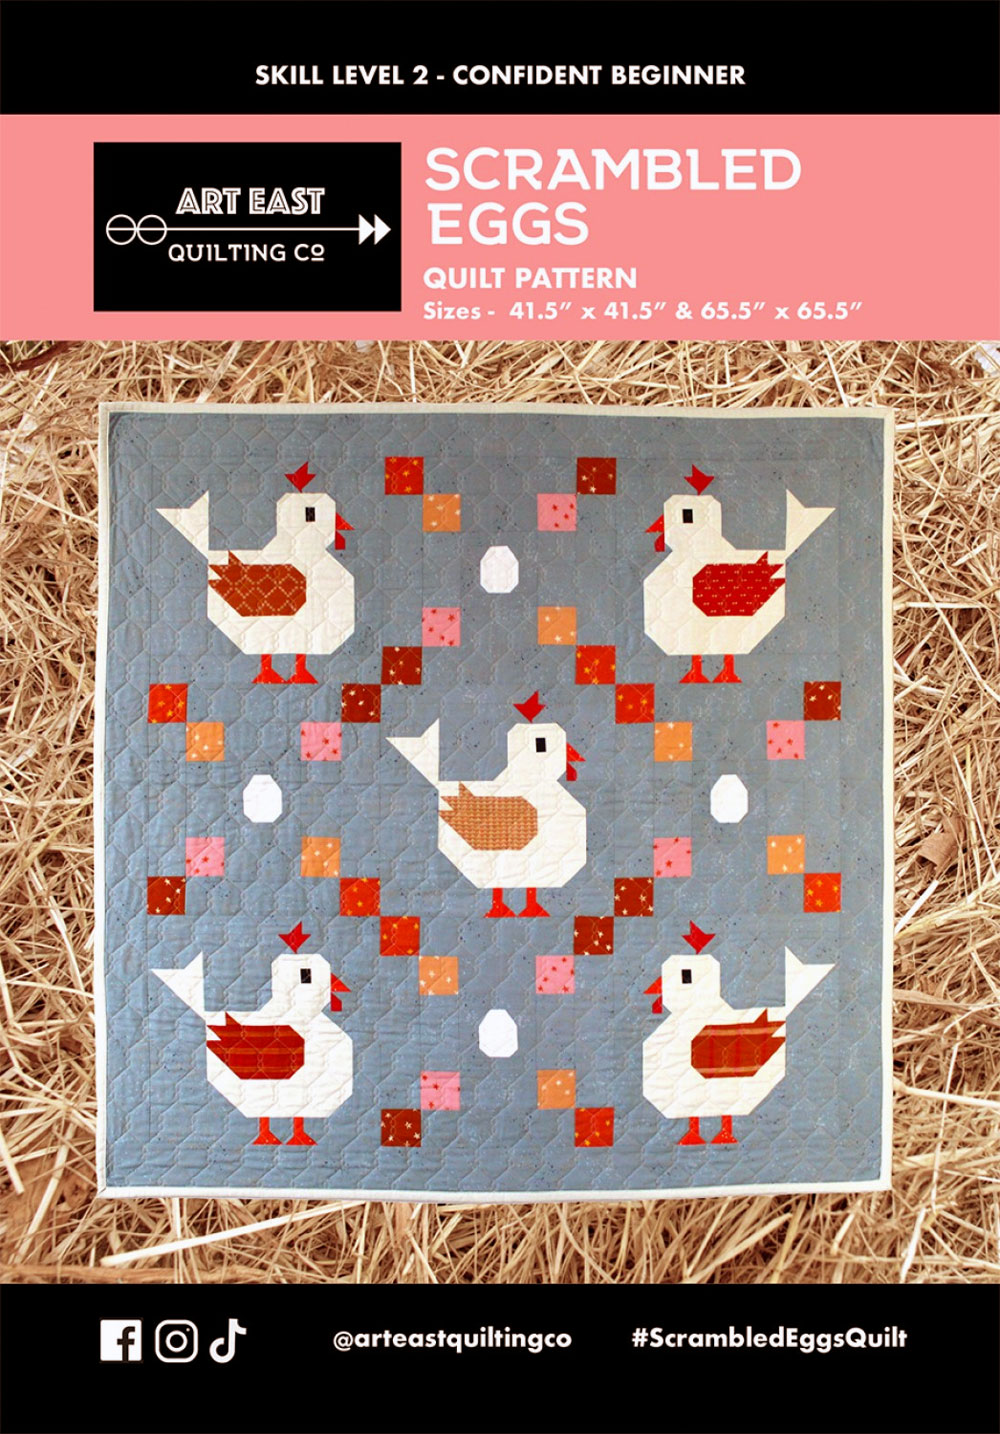 Scrambled-Eggs-quilt-sewing-pattern-Art-East-Quilting-Co-front